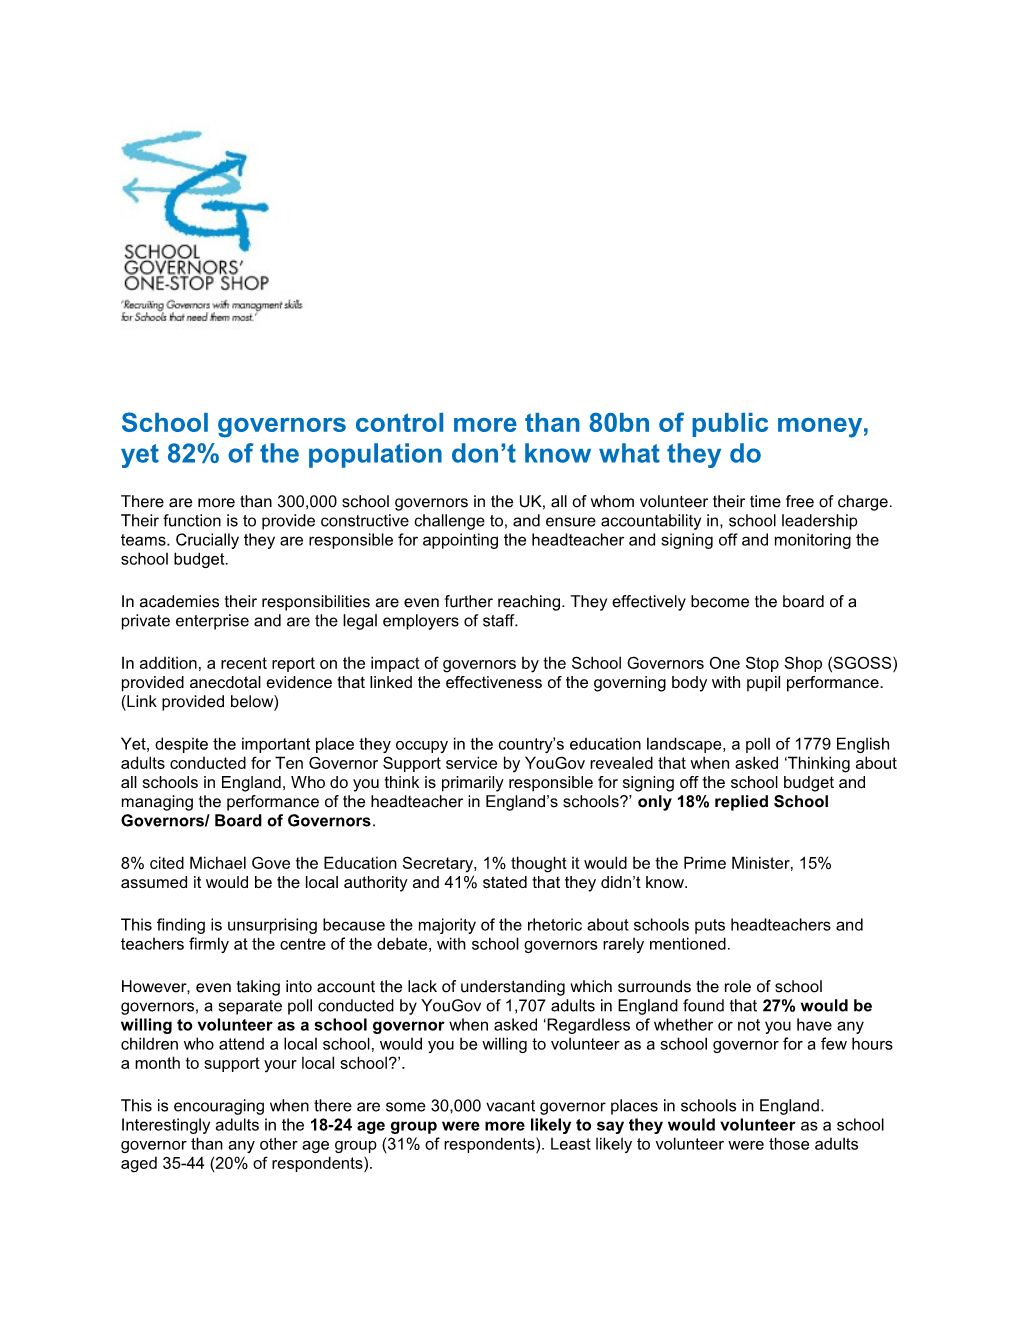 School Governors Control More Than 80Bn of Public Money, Yet 82% of the Population Don